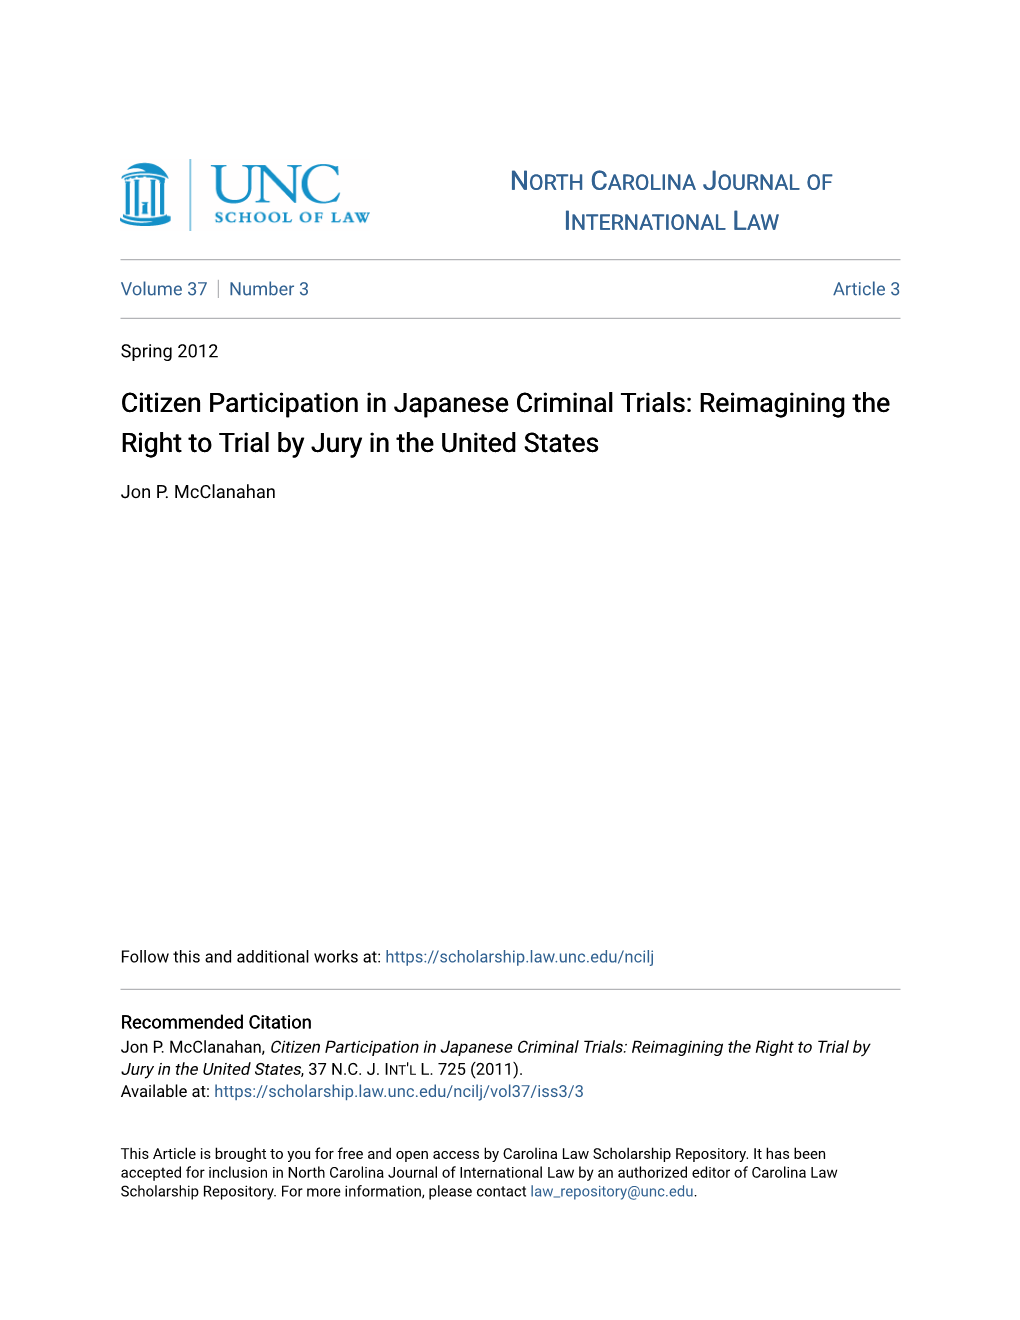 Citizen Participation in Japanese Criminal Trials: Reimagining the Right to Trial by Jury in the United States